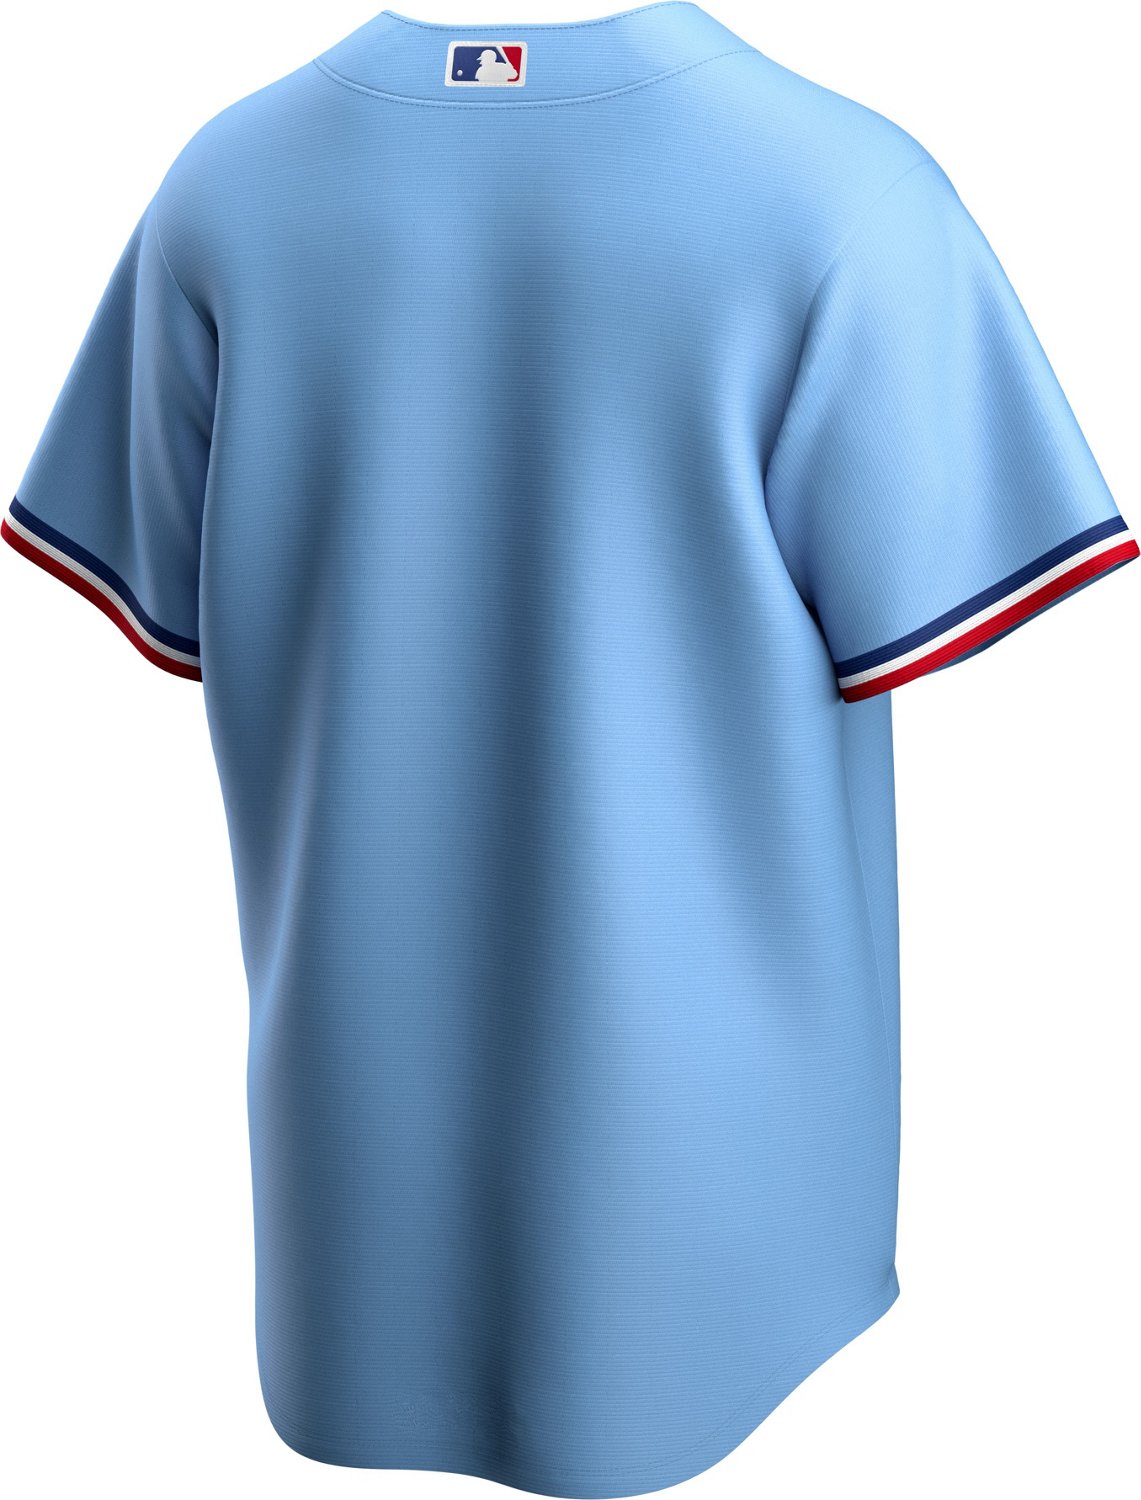 Texas Rangers Nike Official Replica Home Jersey - Mens with